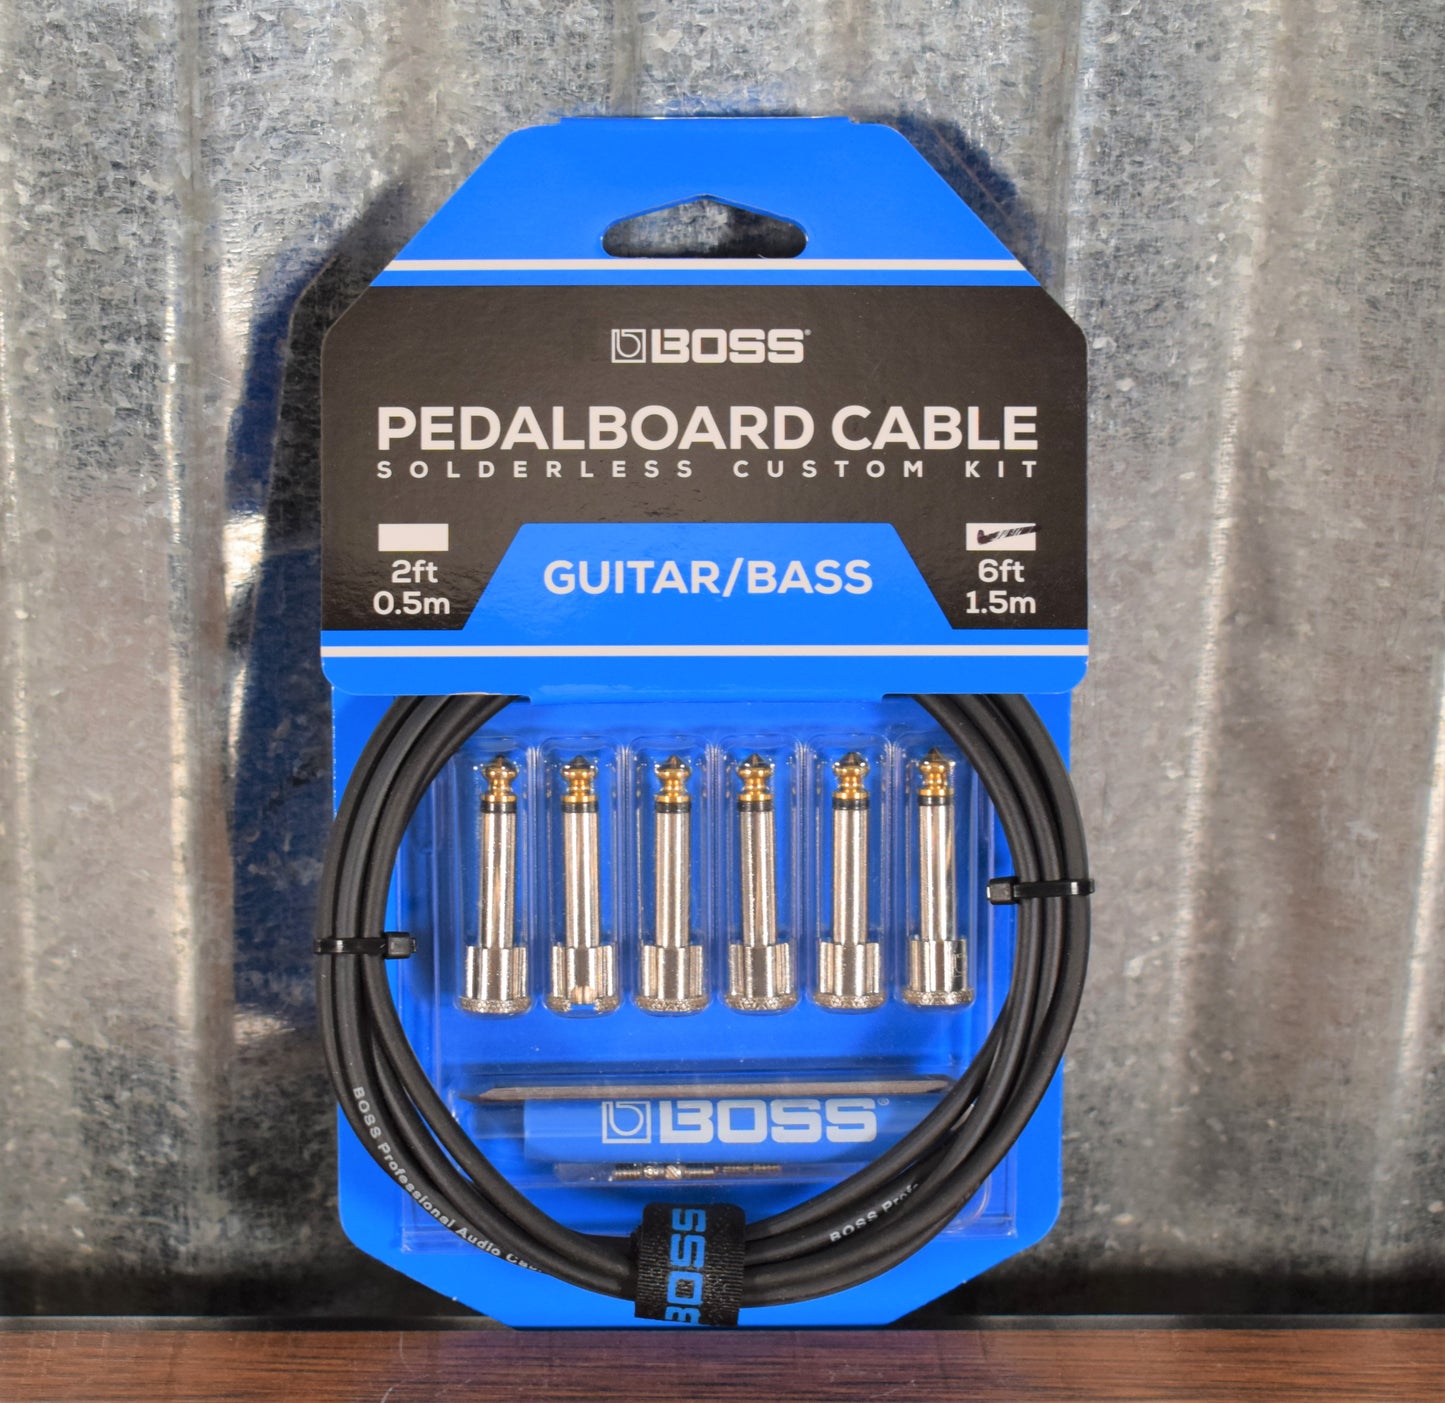 Boss BCK-6 6' 6 Connector Pedalboard Cable Kit